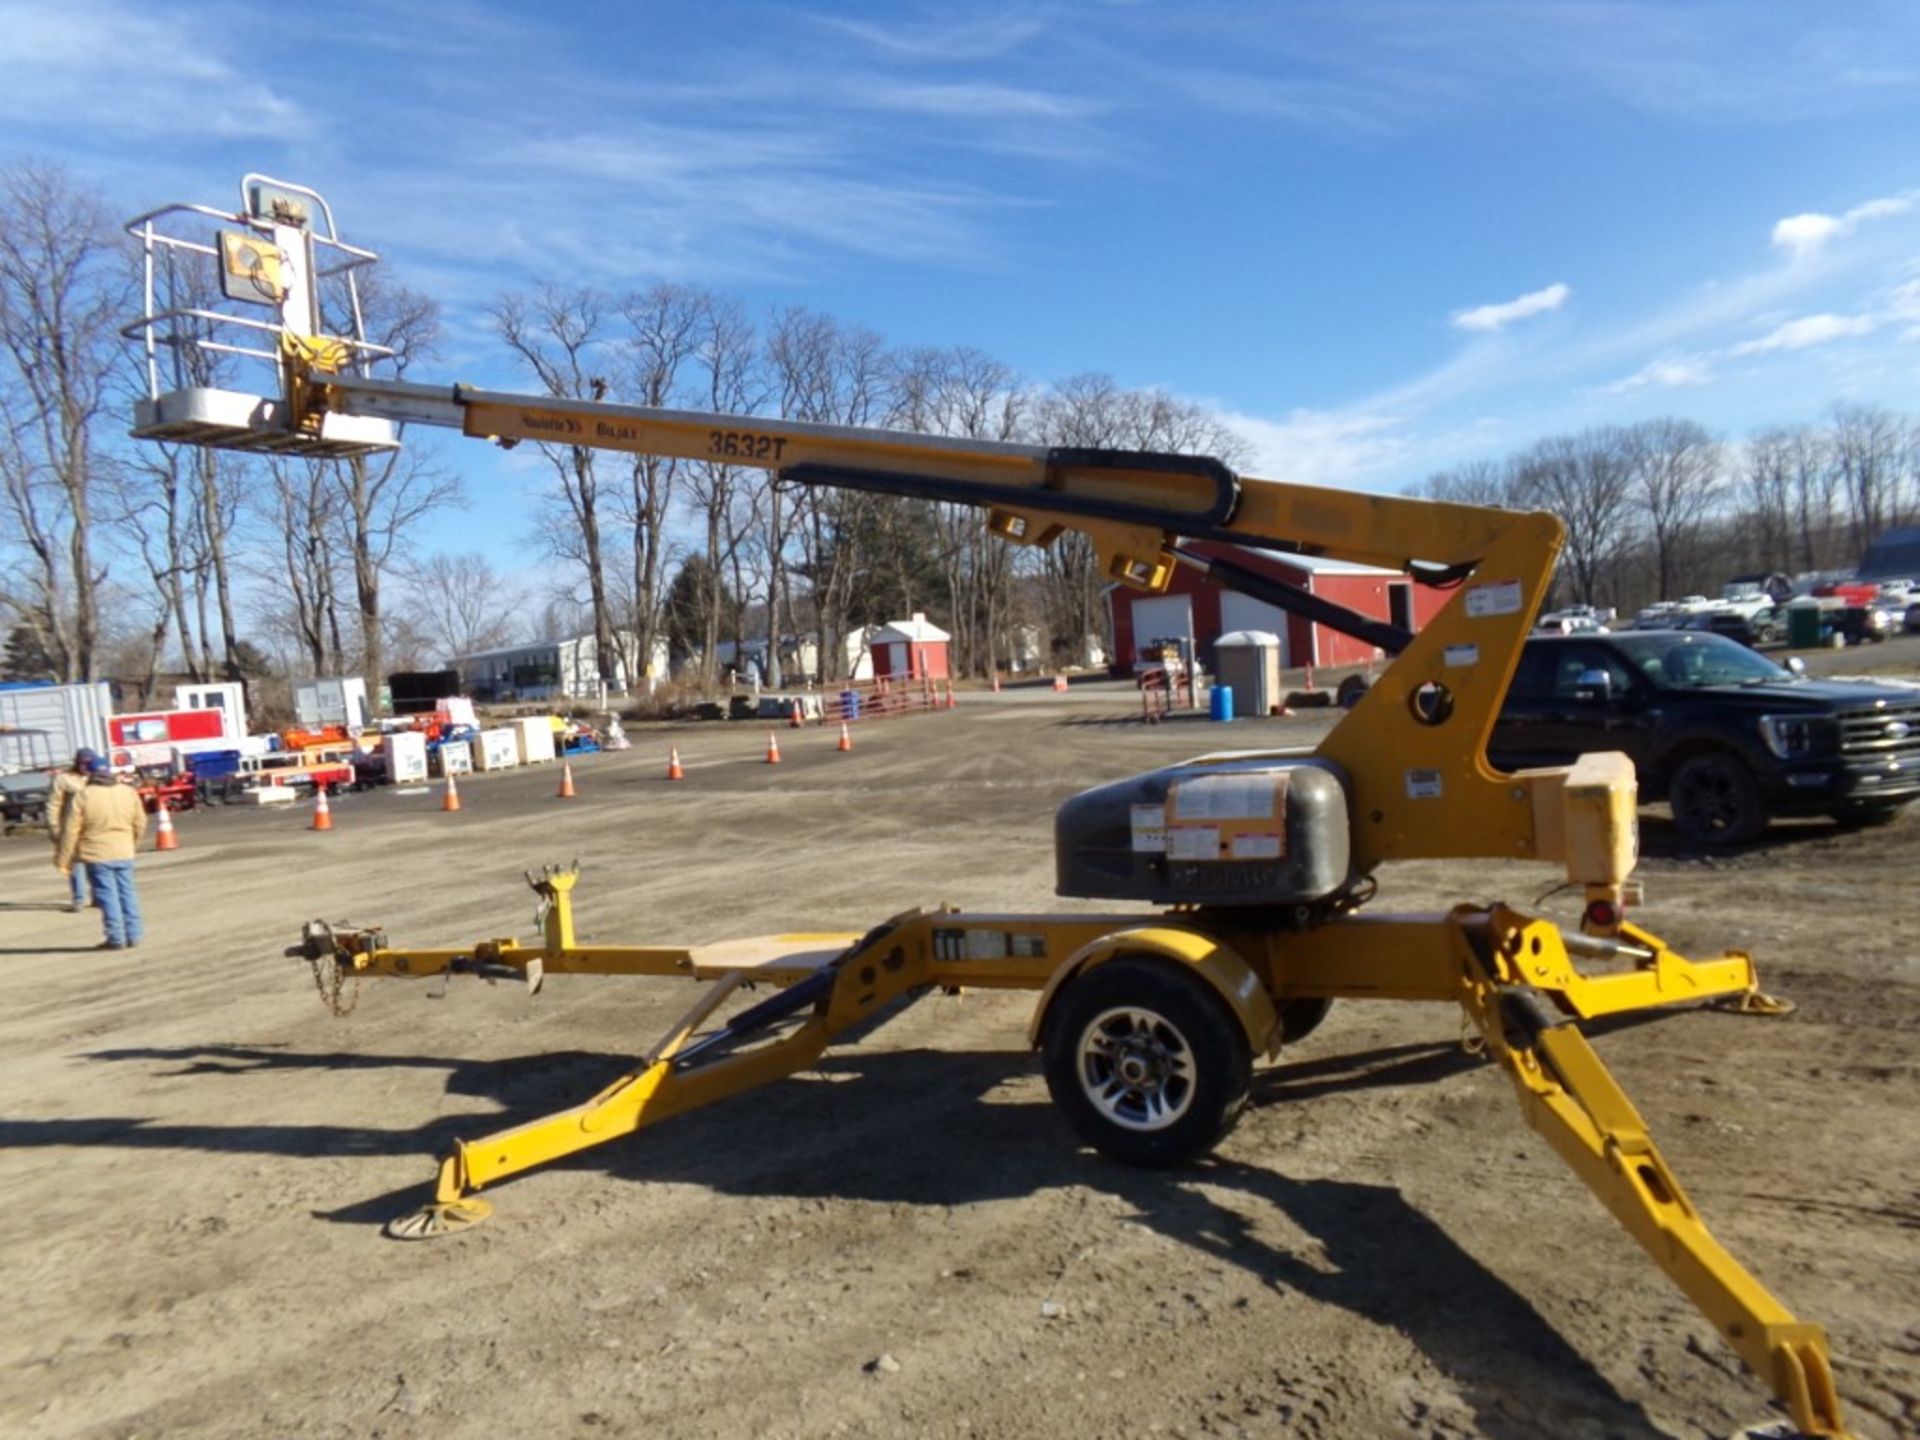 2013 Haulotte Bil Jax 3632T, Tow-Behind Boom Lift, Electric, Works But Batteries Don't Last Long, - Image 3 of 5